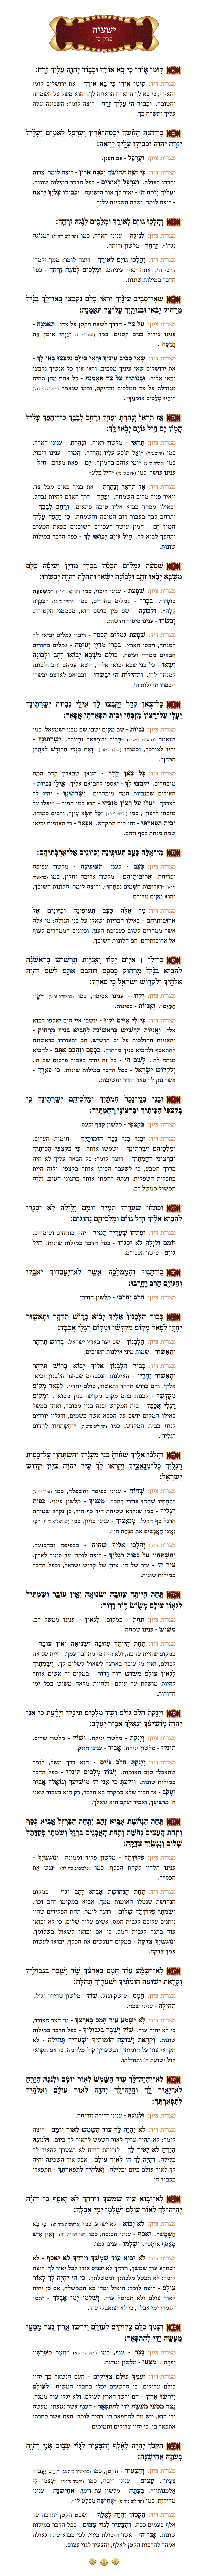 Sefer Yeshayohu Chapter 60 with commentary